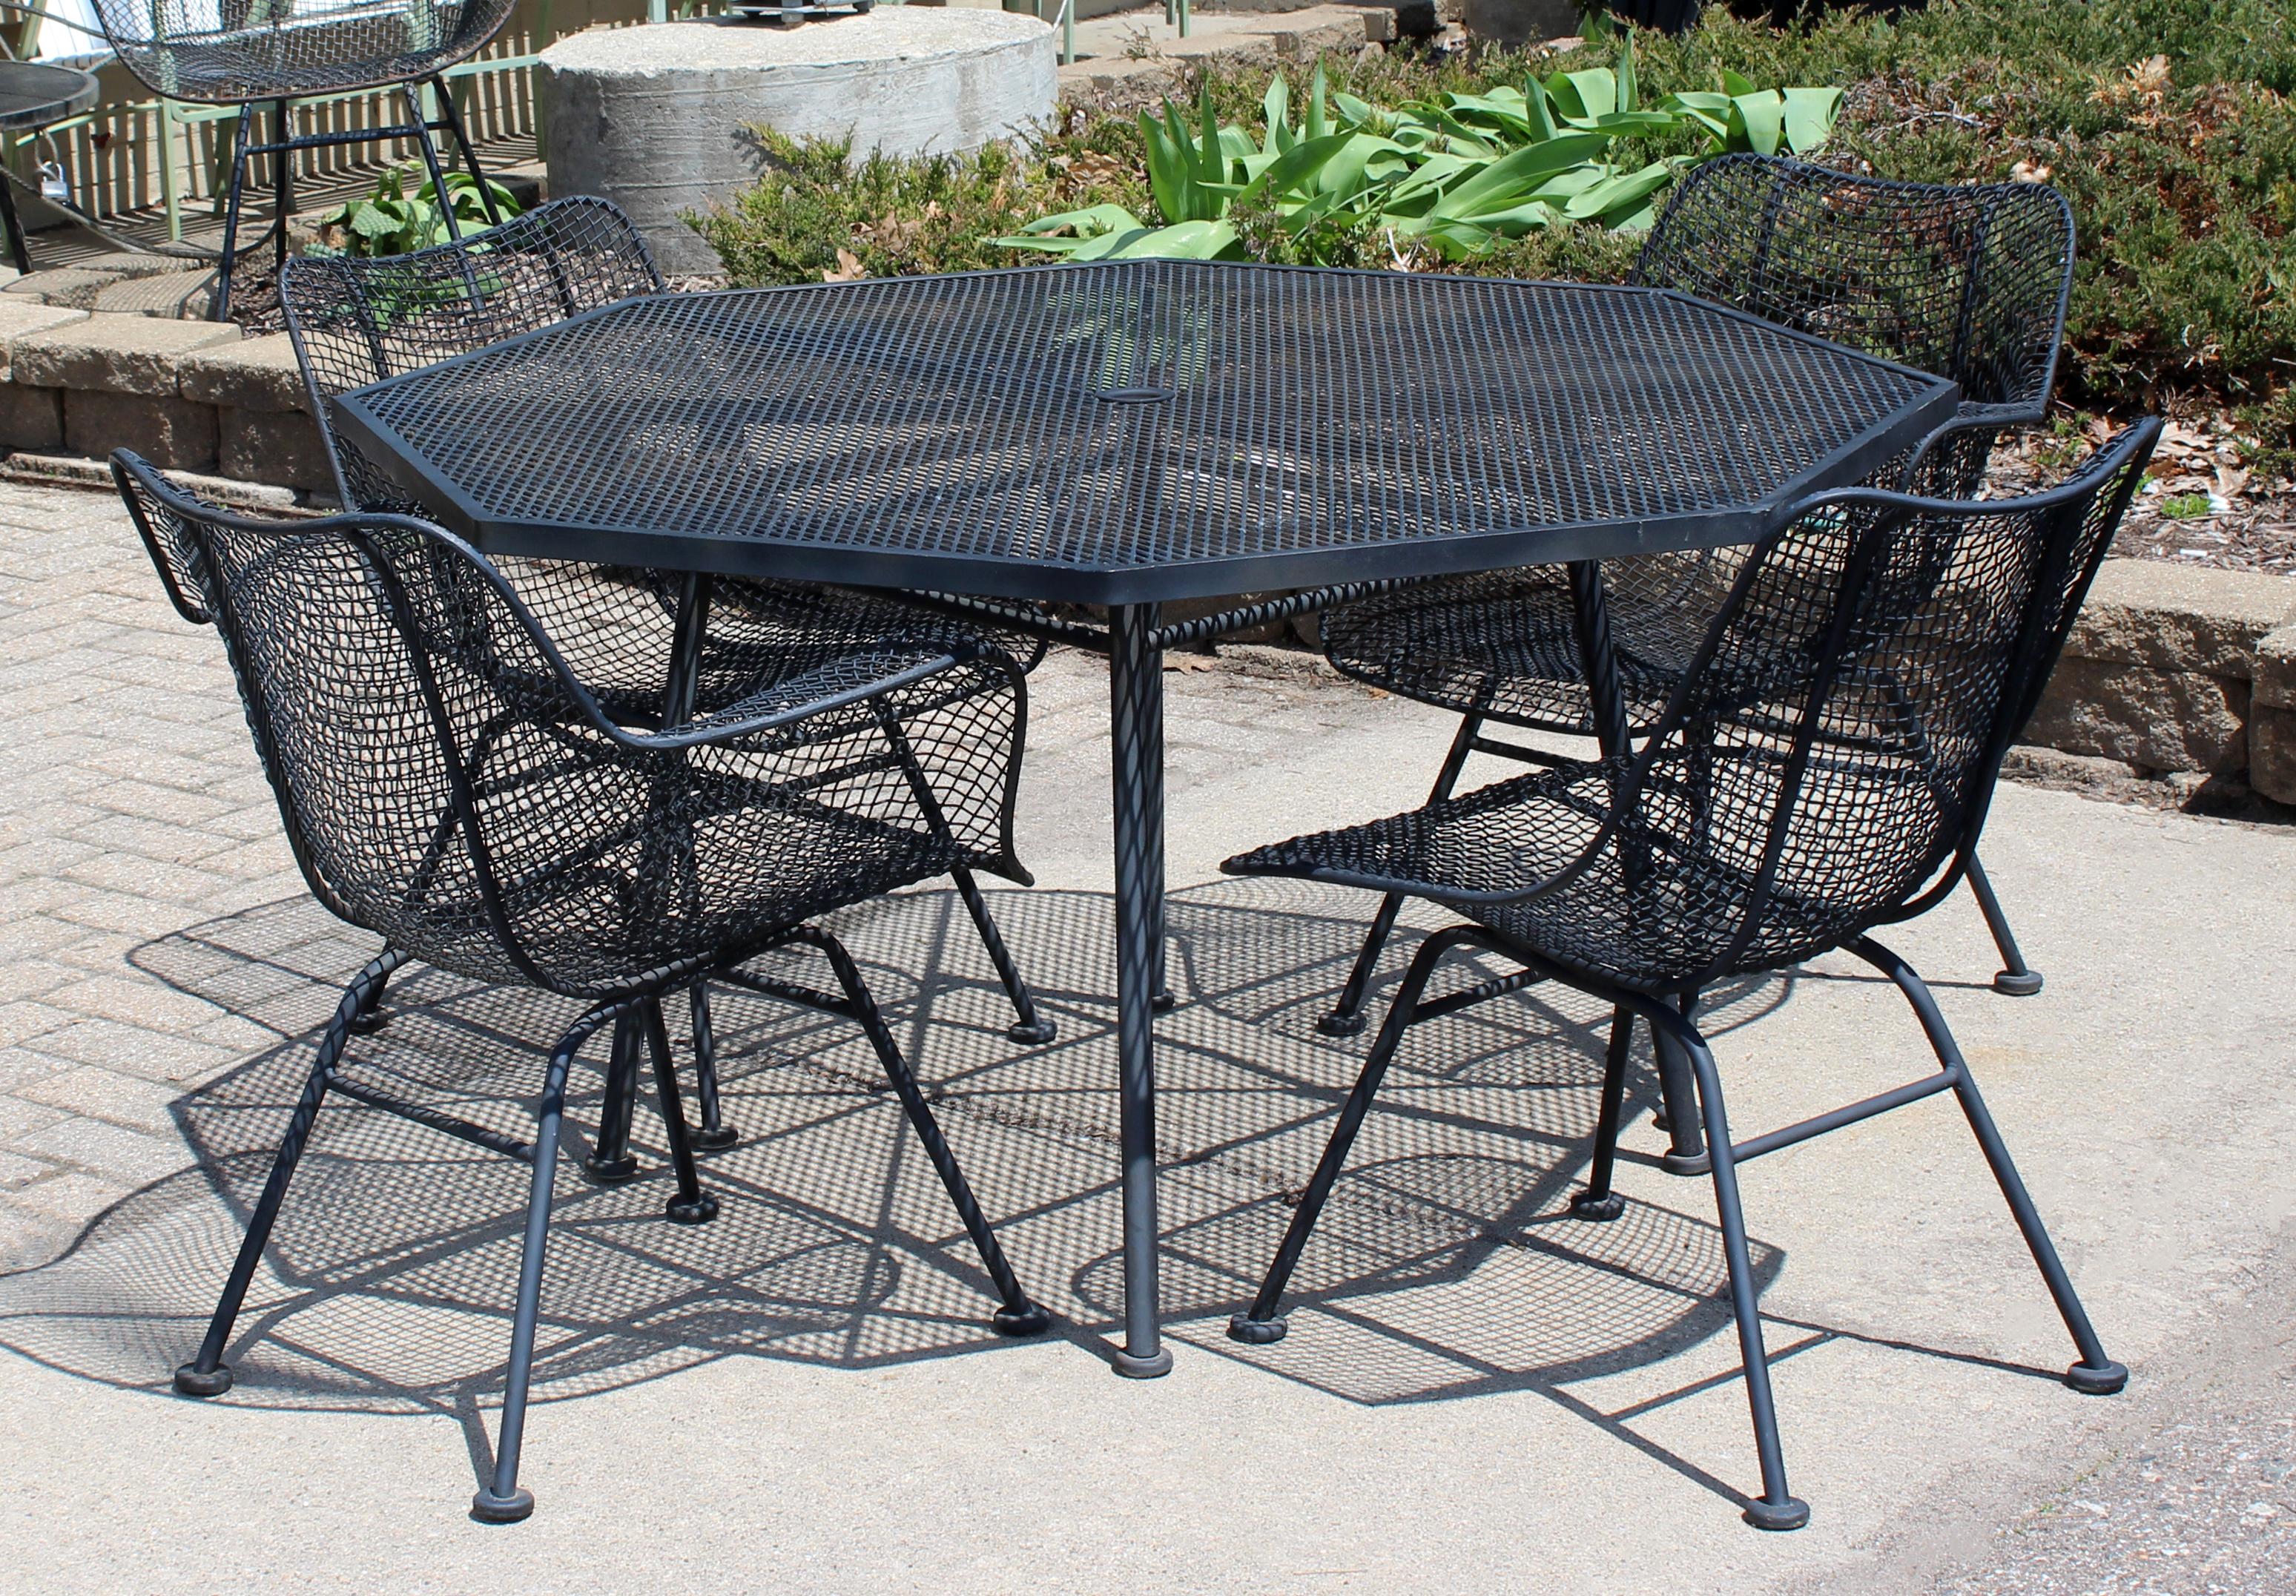 For your consideration is an incredible, outdoor patio dining set, including a table with two side chairs and two armchairs, by Woodard Sculptura, circa 1960s. In excellent condition. The dimensions of the table are 51